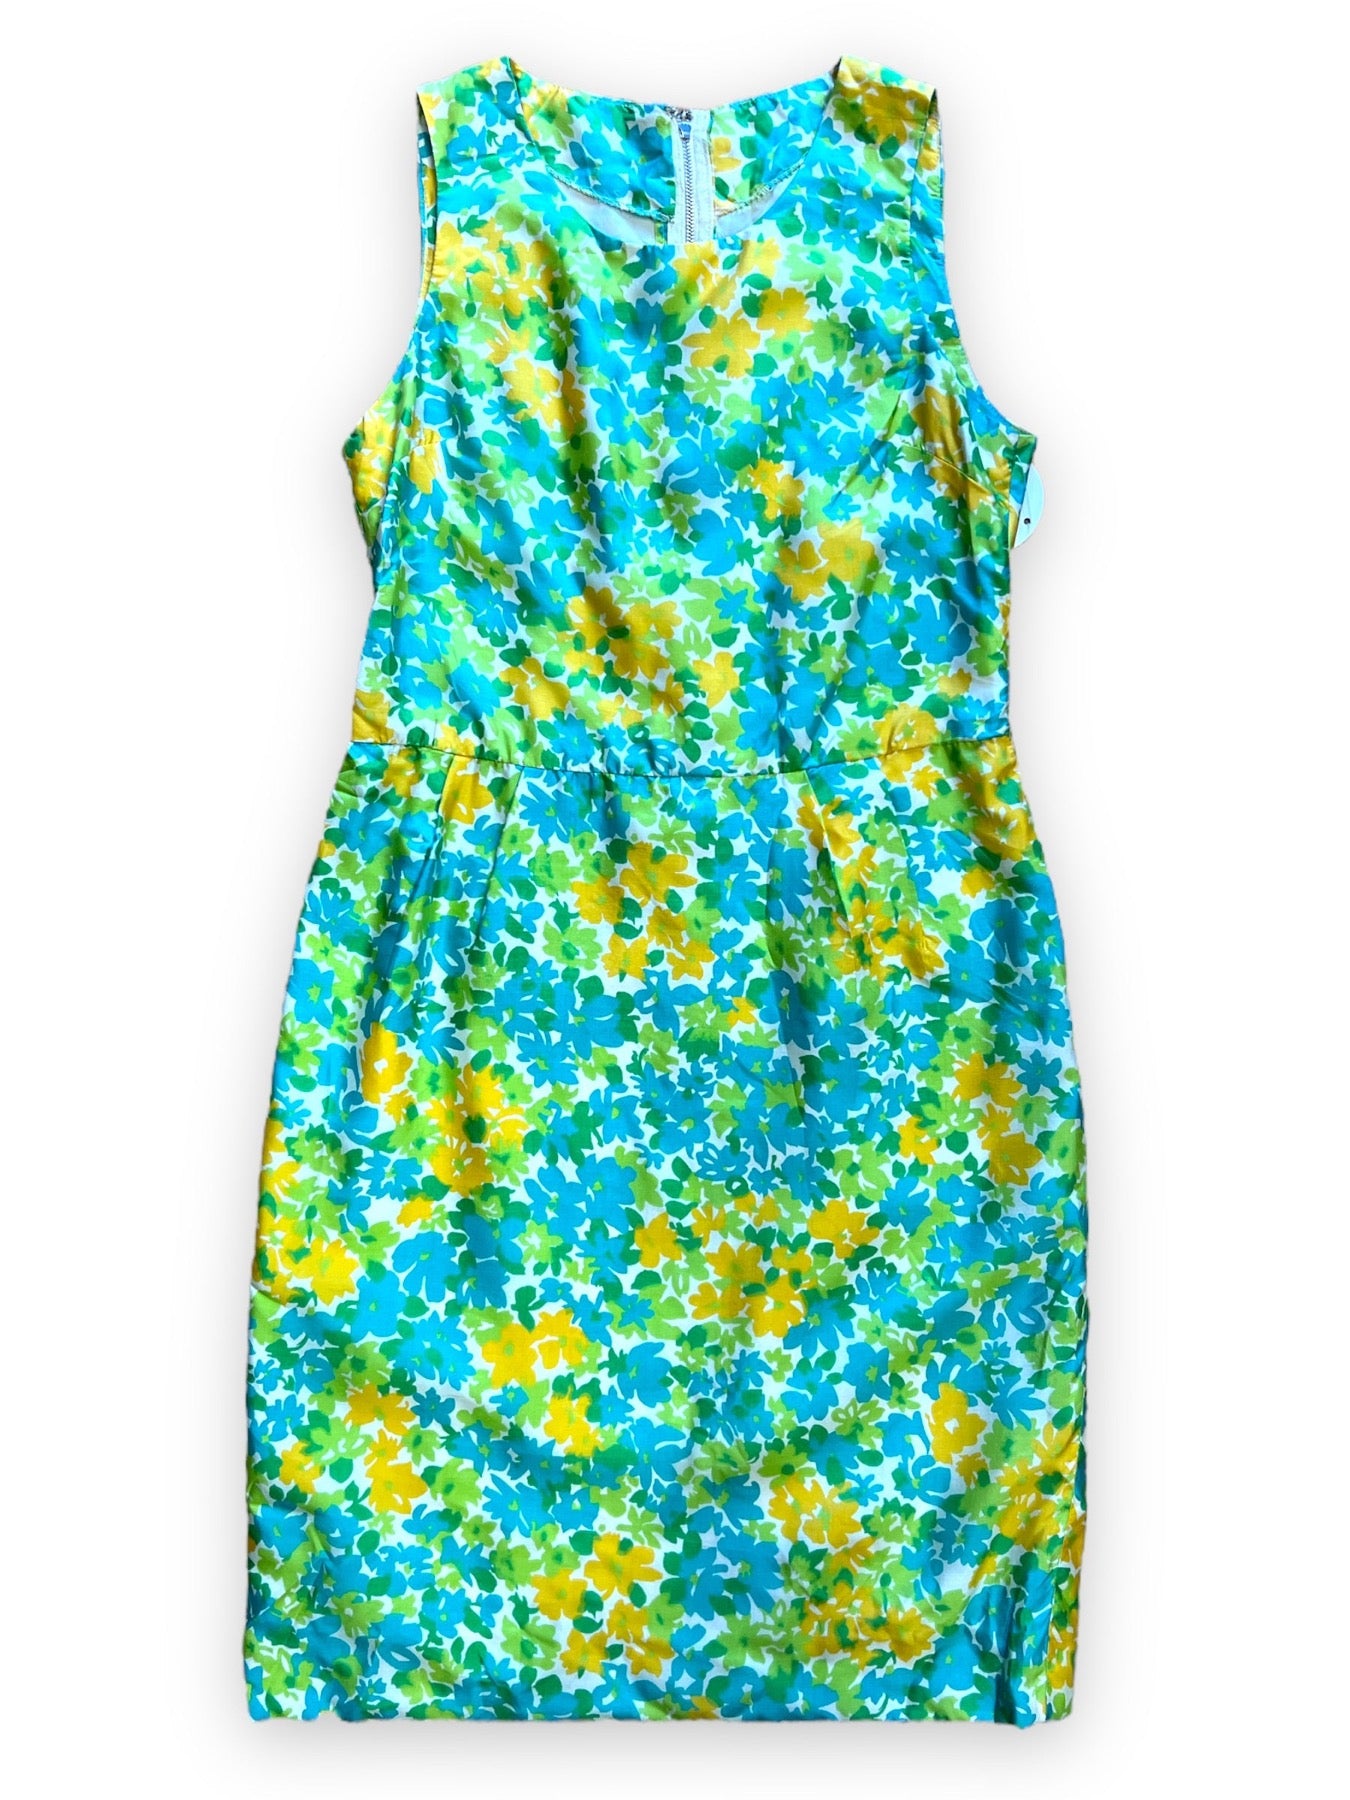 60s TEAL & YELLOW FLORAL DRESS